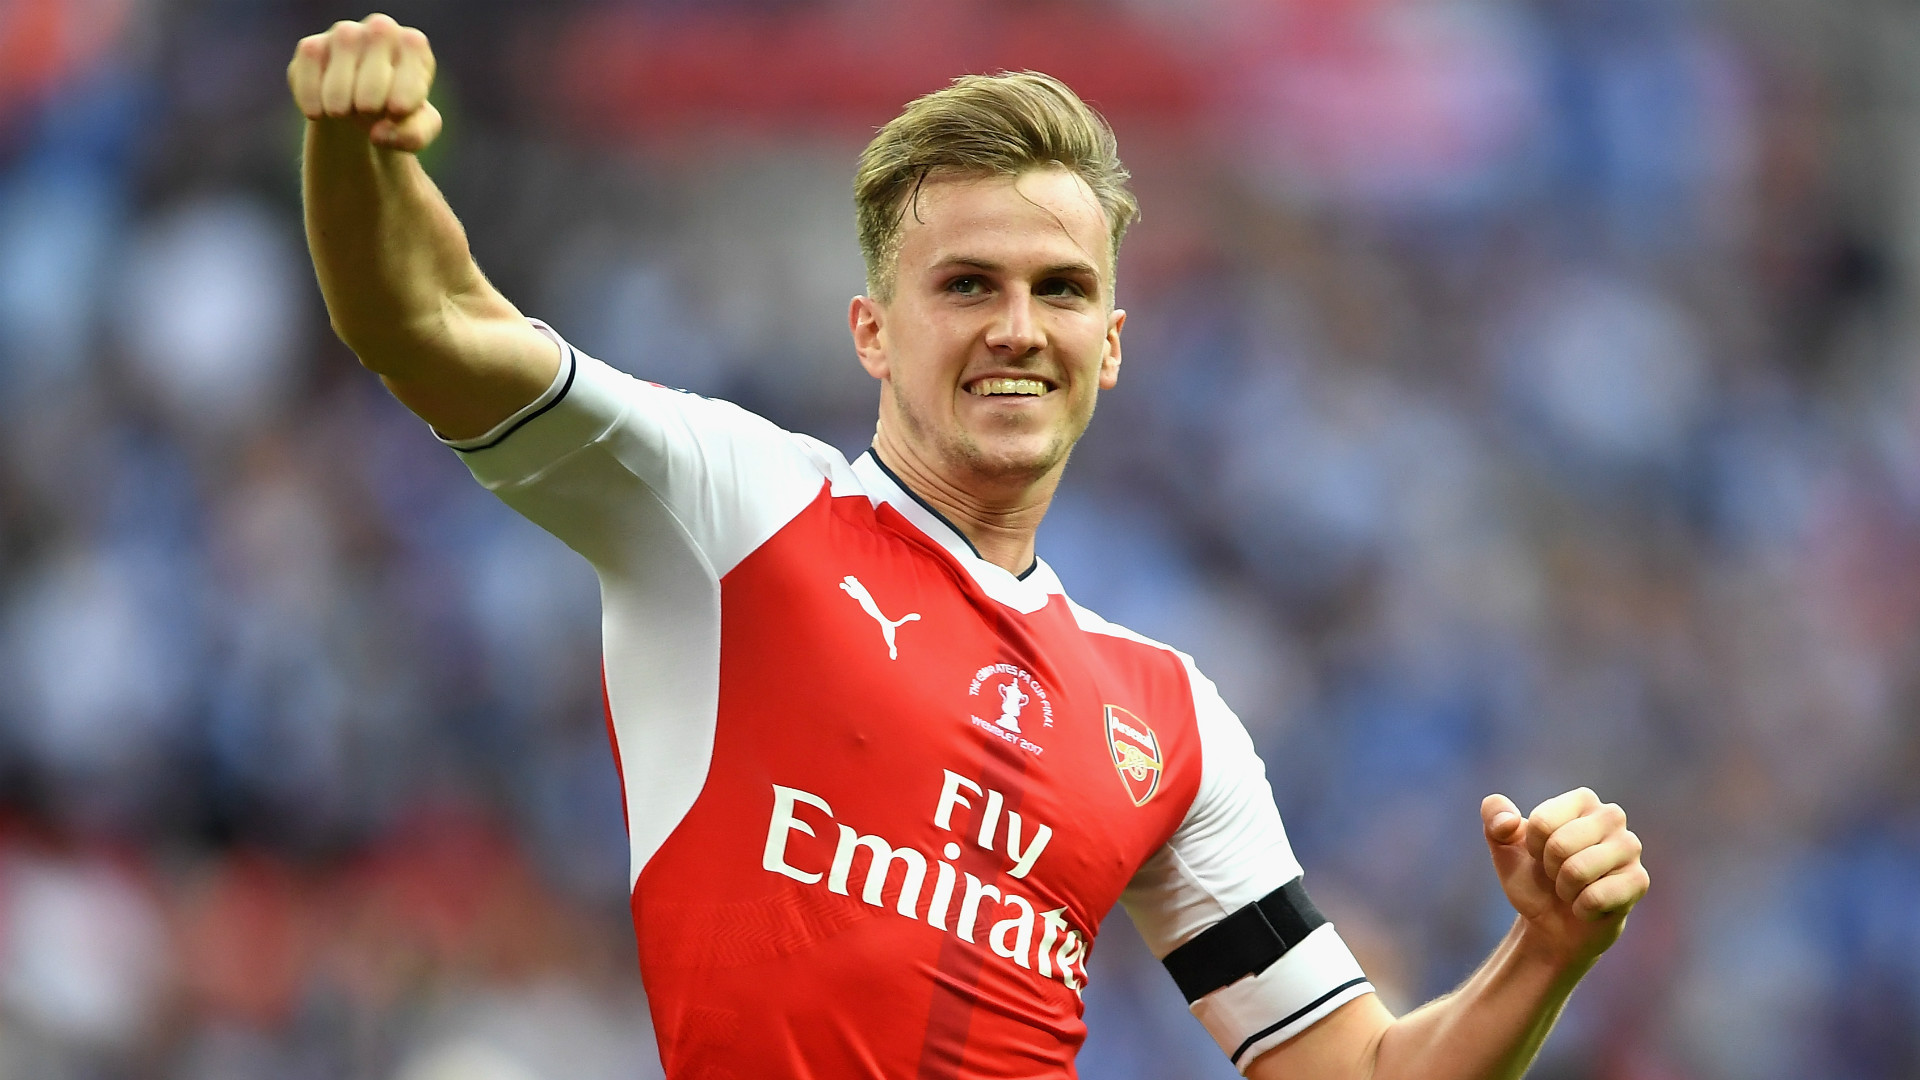 ARSENAL TO OFFER DEFENDER NEW DEAL Rob-holding-arsenal_114j5pyxpqrzn190293gtq6kf0